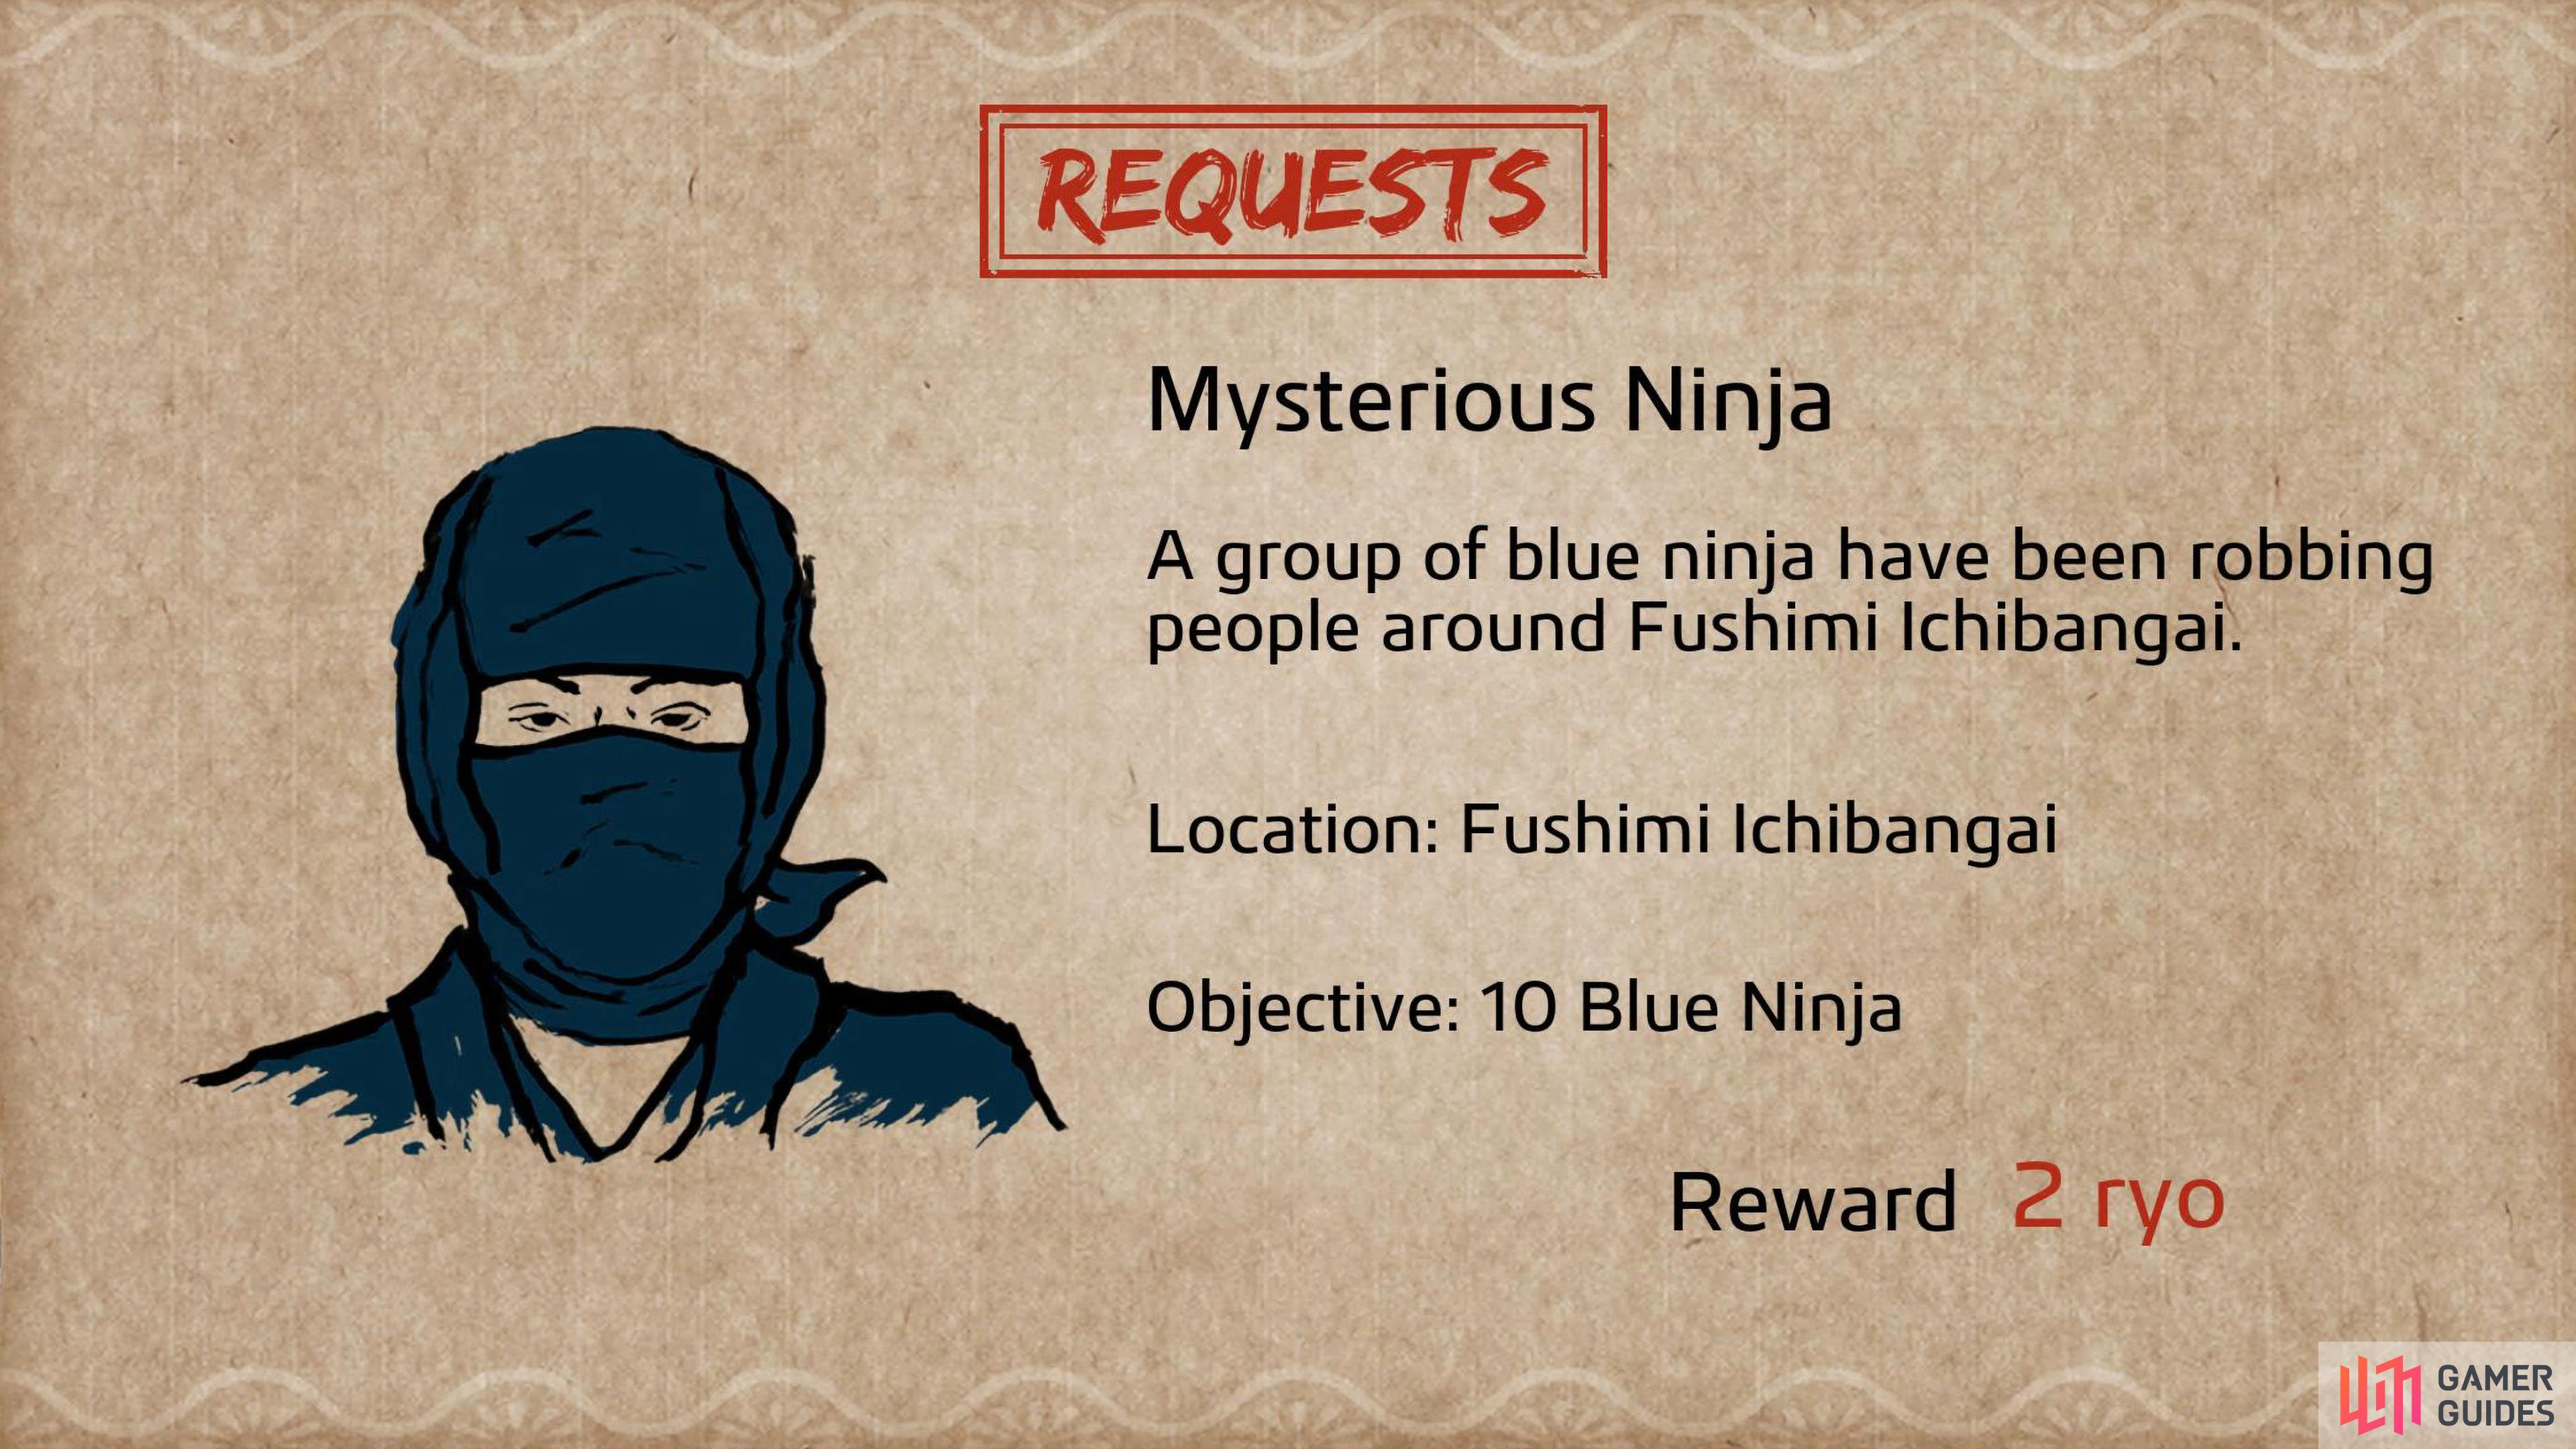 This is the second Mysterious Ninjas request, but this one involves blue ninjas.